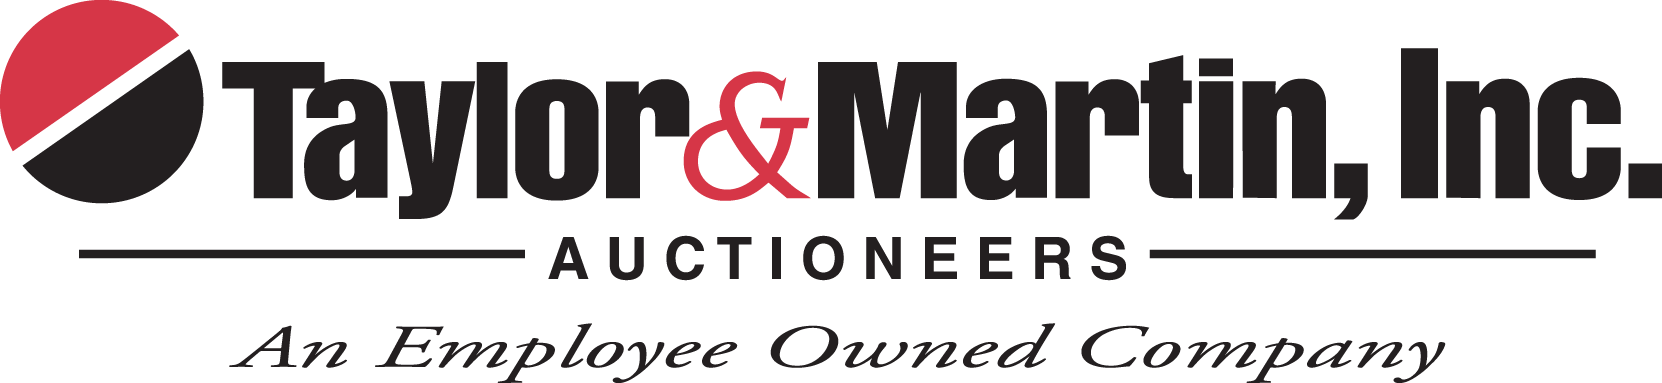 T & M Master Auctioneers Logo